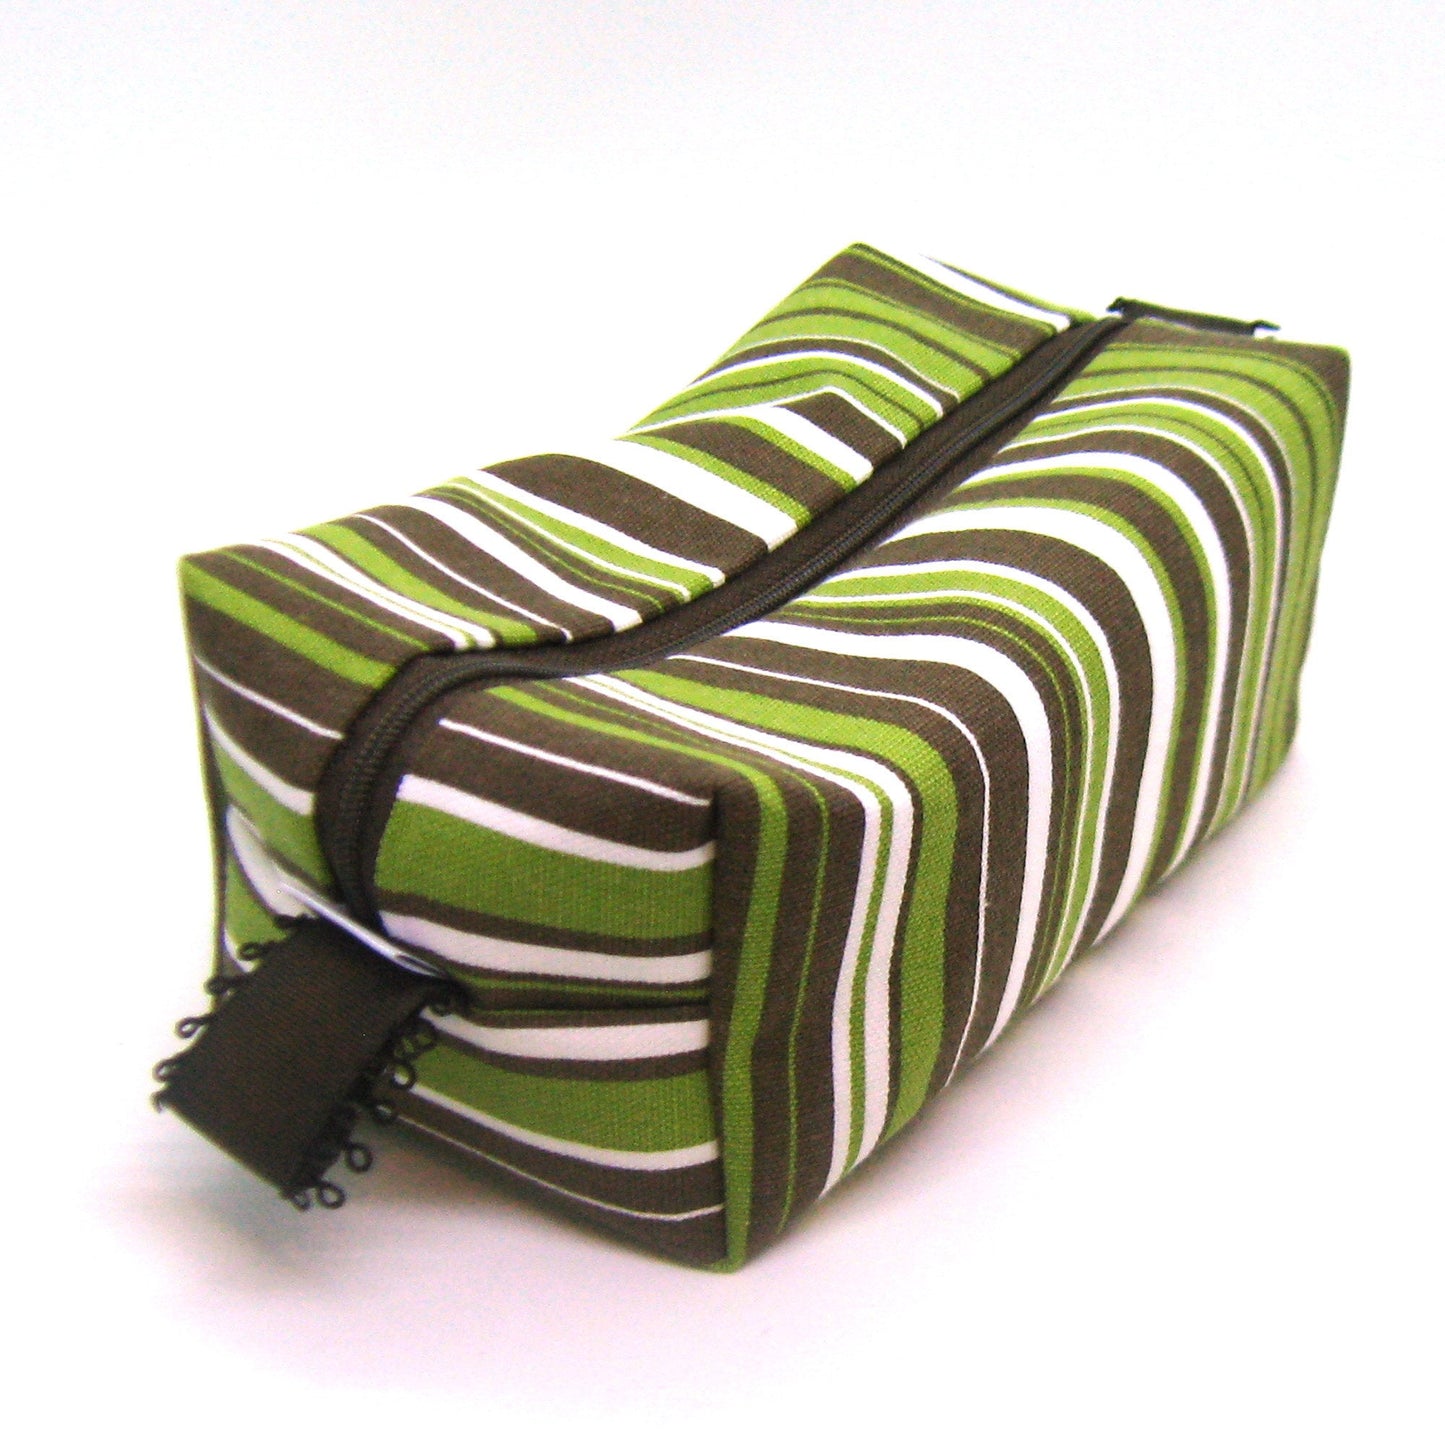 Striped Makeup Bag Cosmetic Case - ready to ship